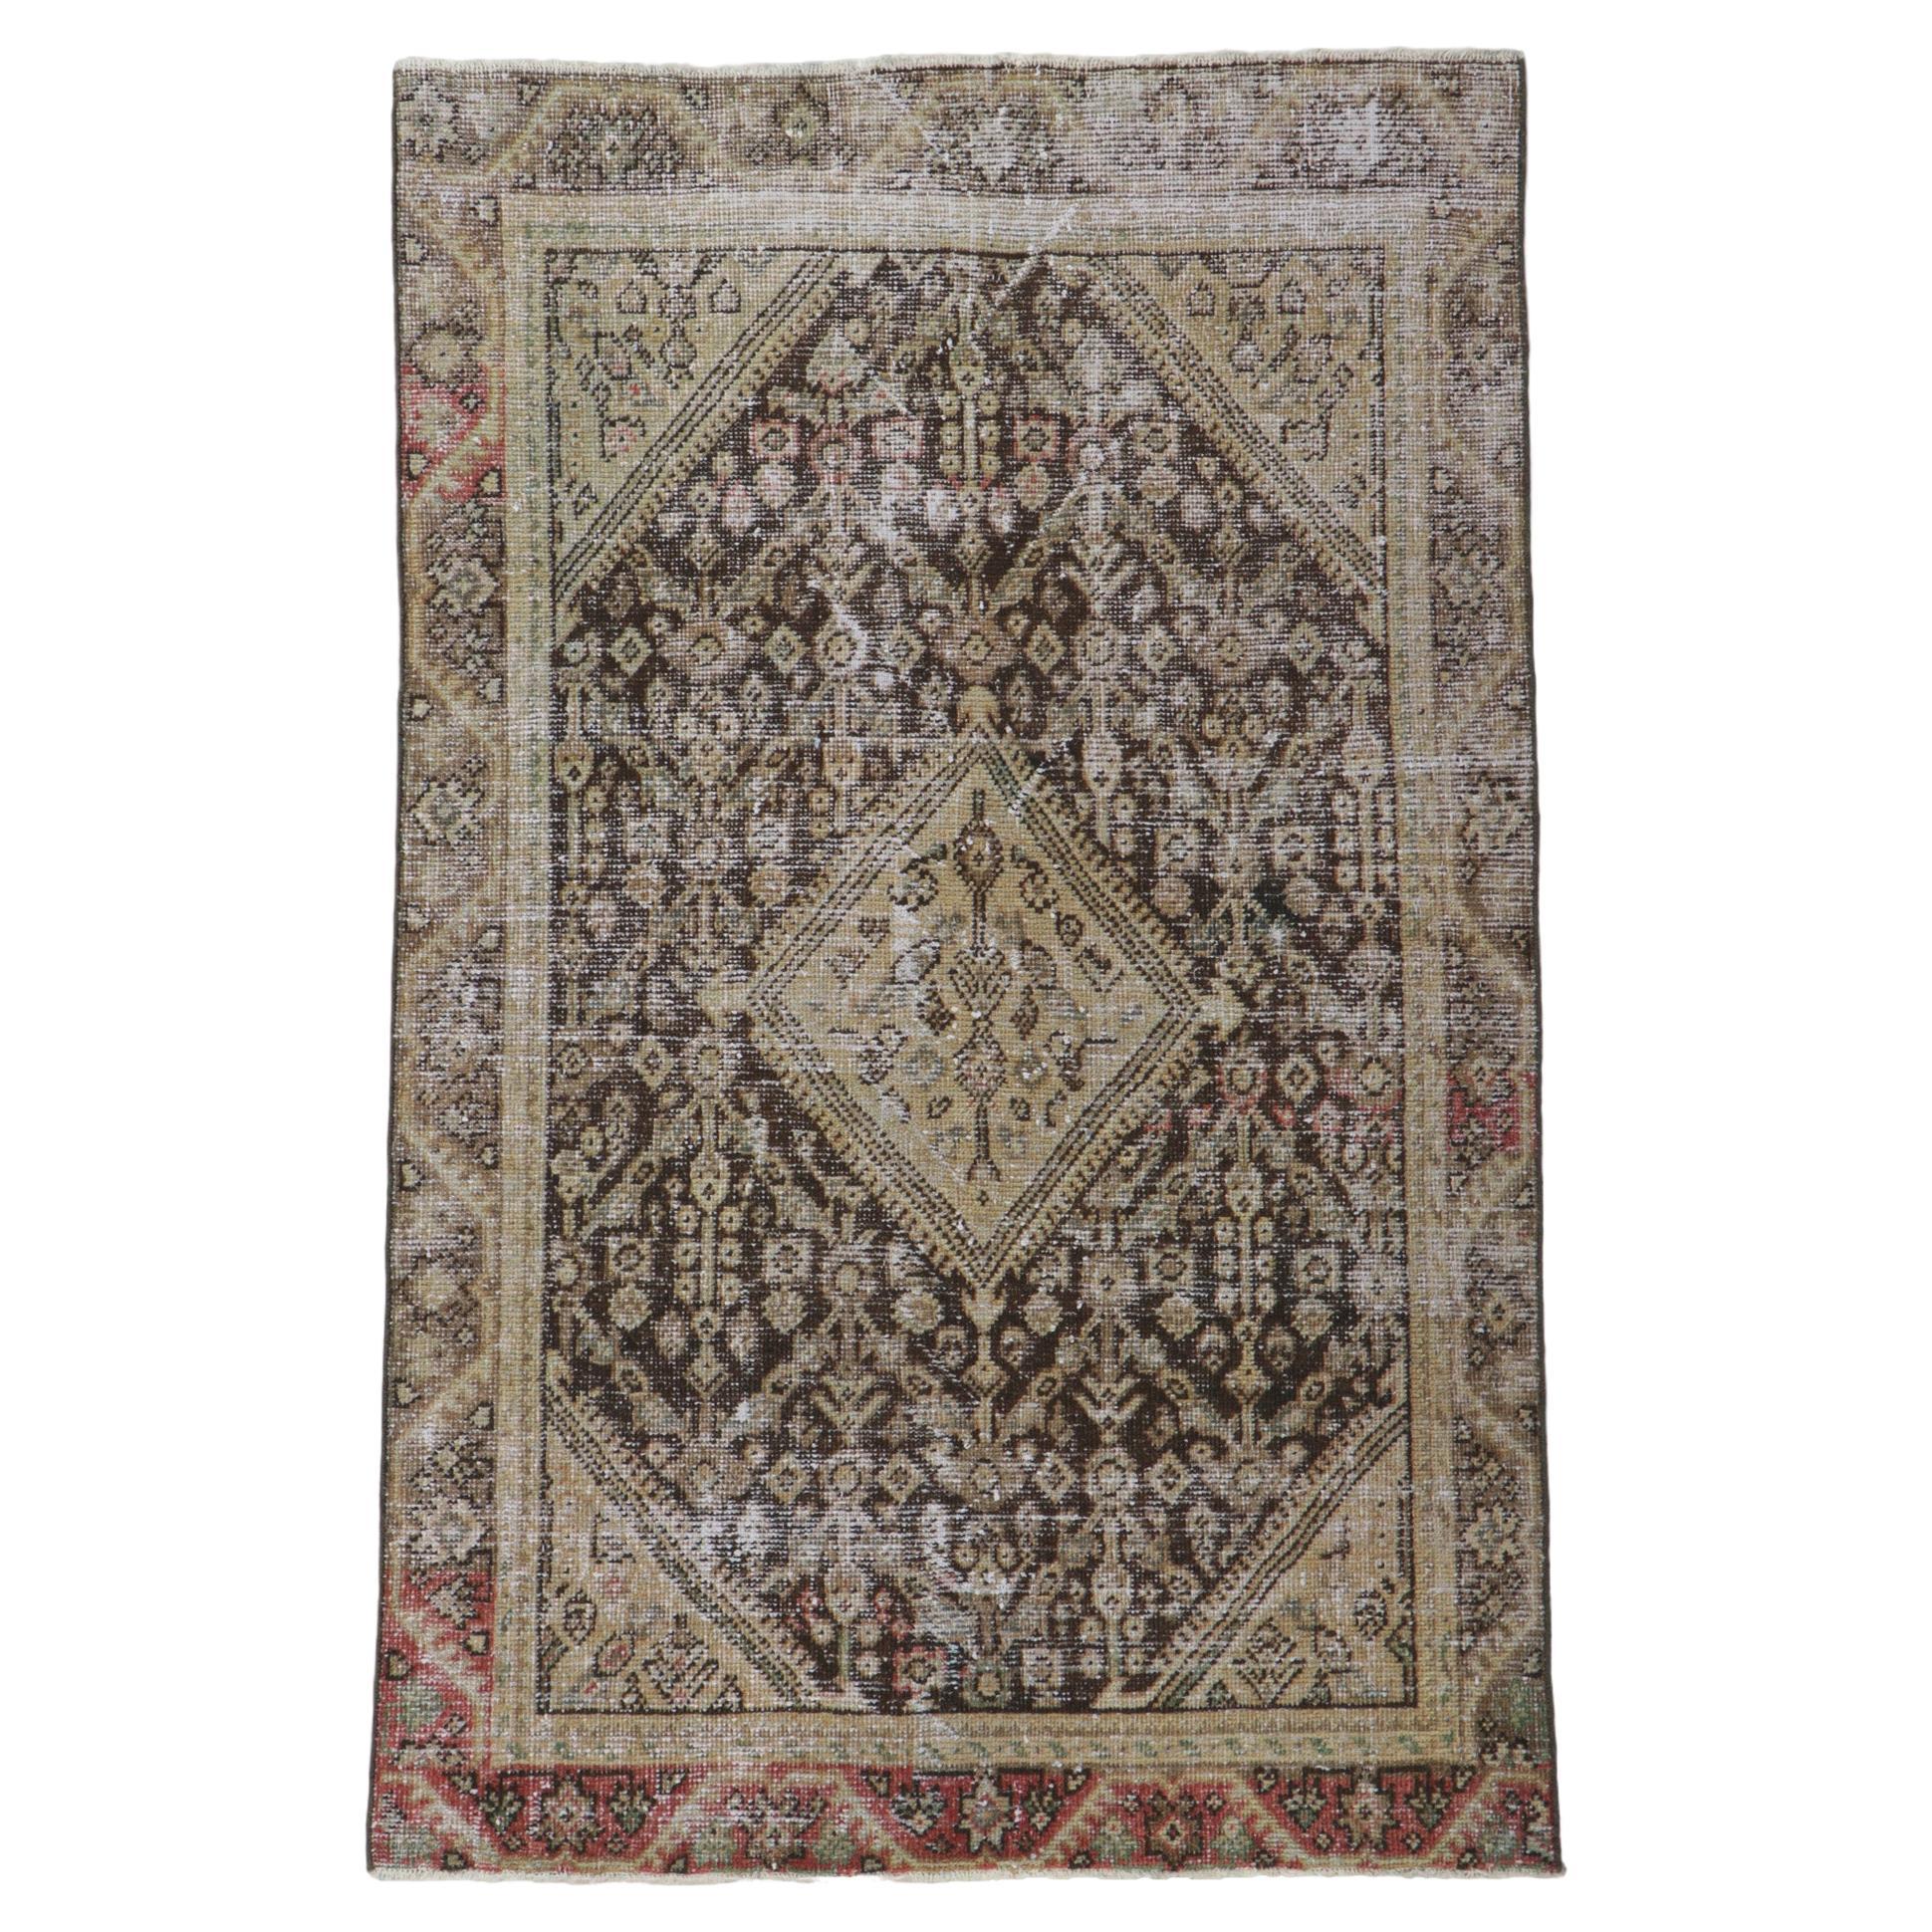 Antique-Worn Persian Mahal Rug, Relaxed Refinement Meets Rugged Beauty